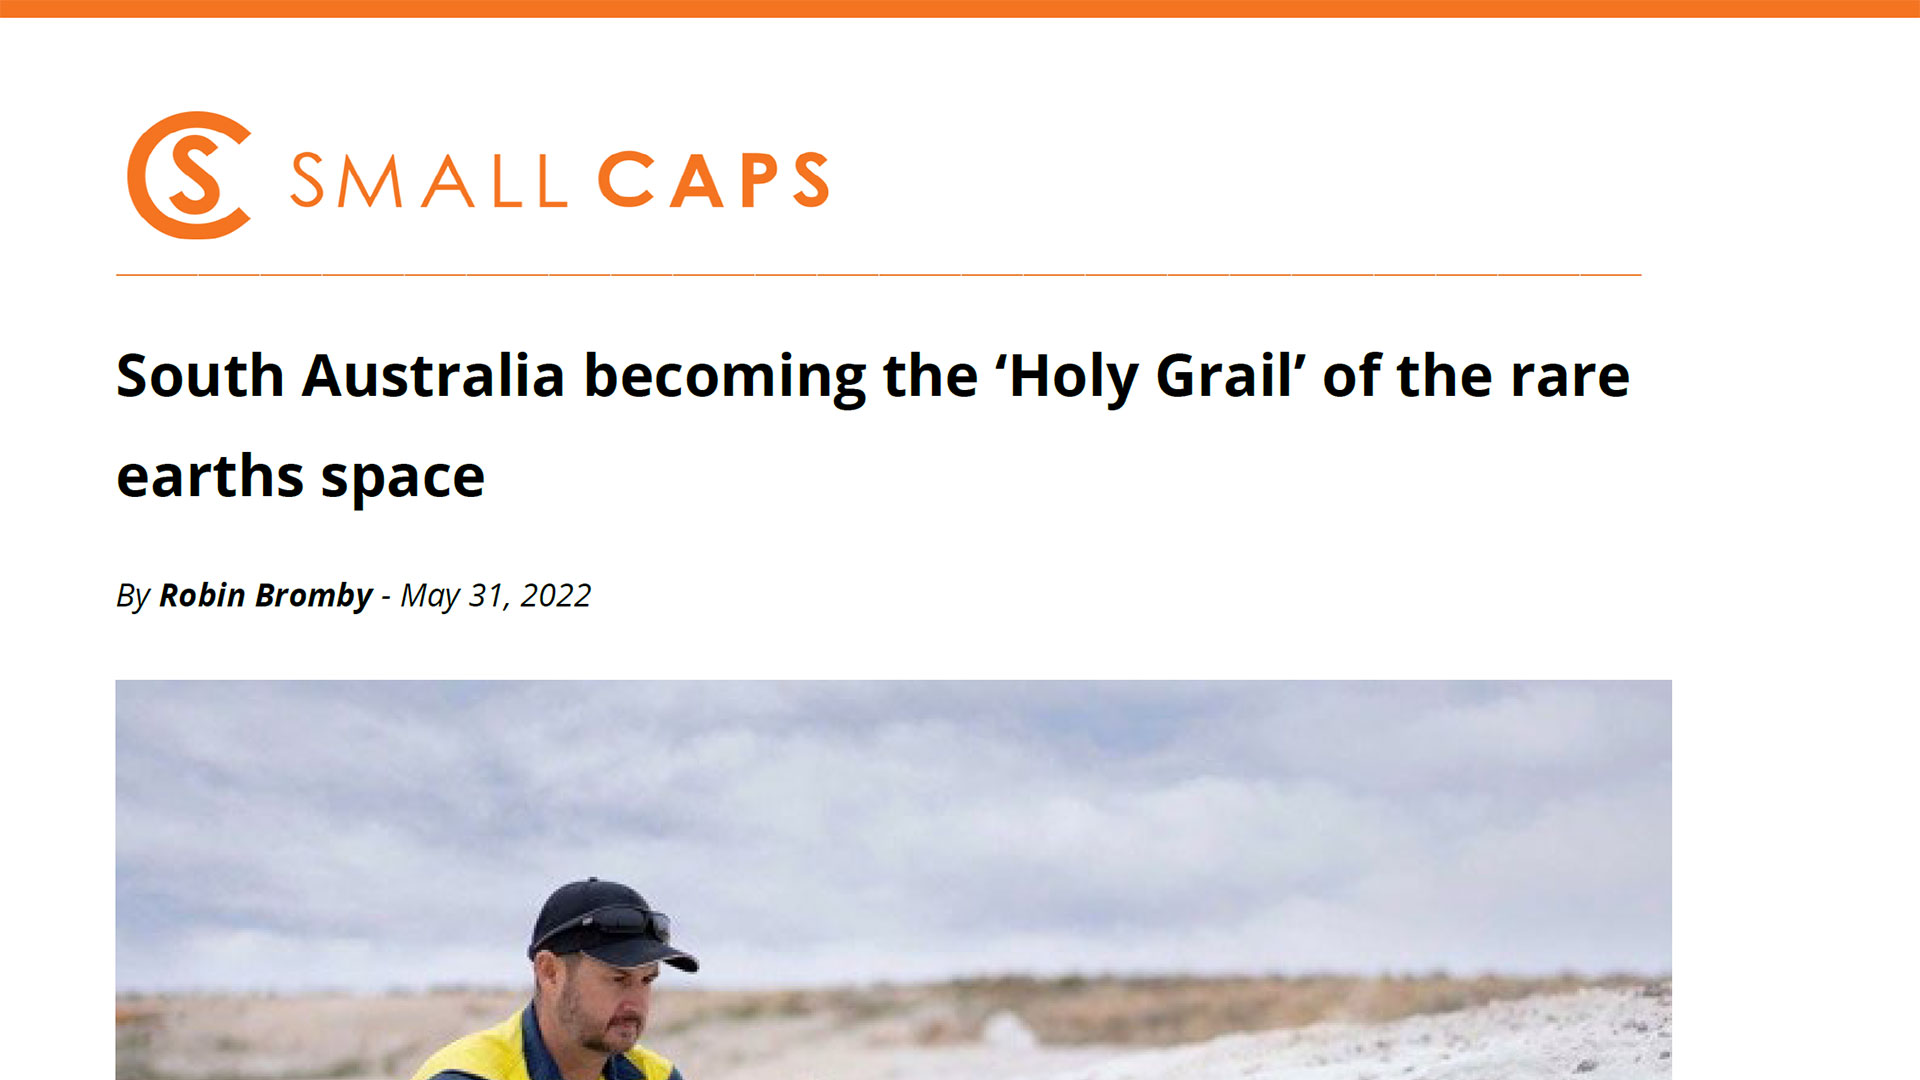 Small Caps: South Australia becoming the ‘Holy Grail’ of the rare earths space